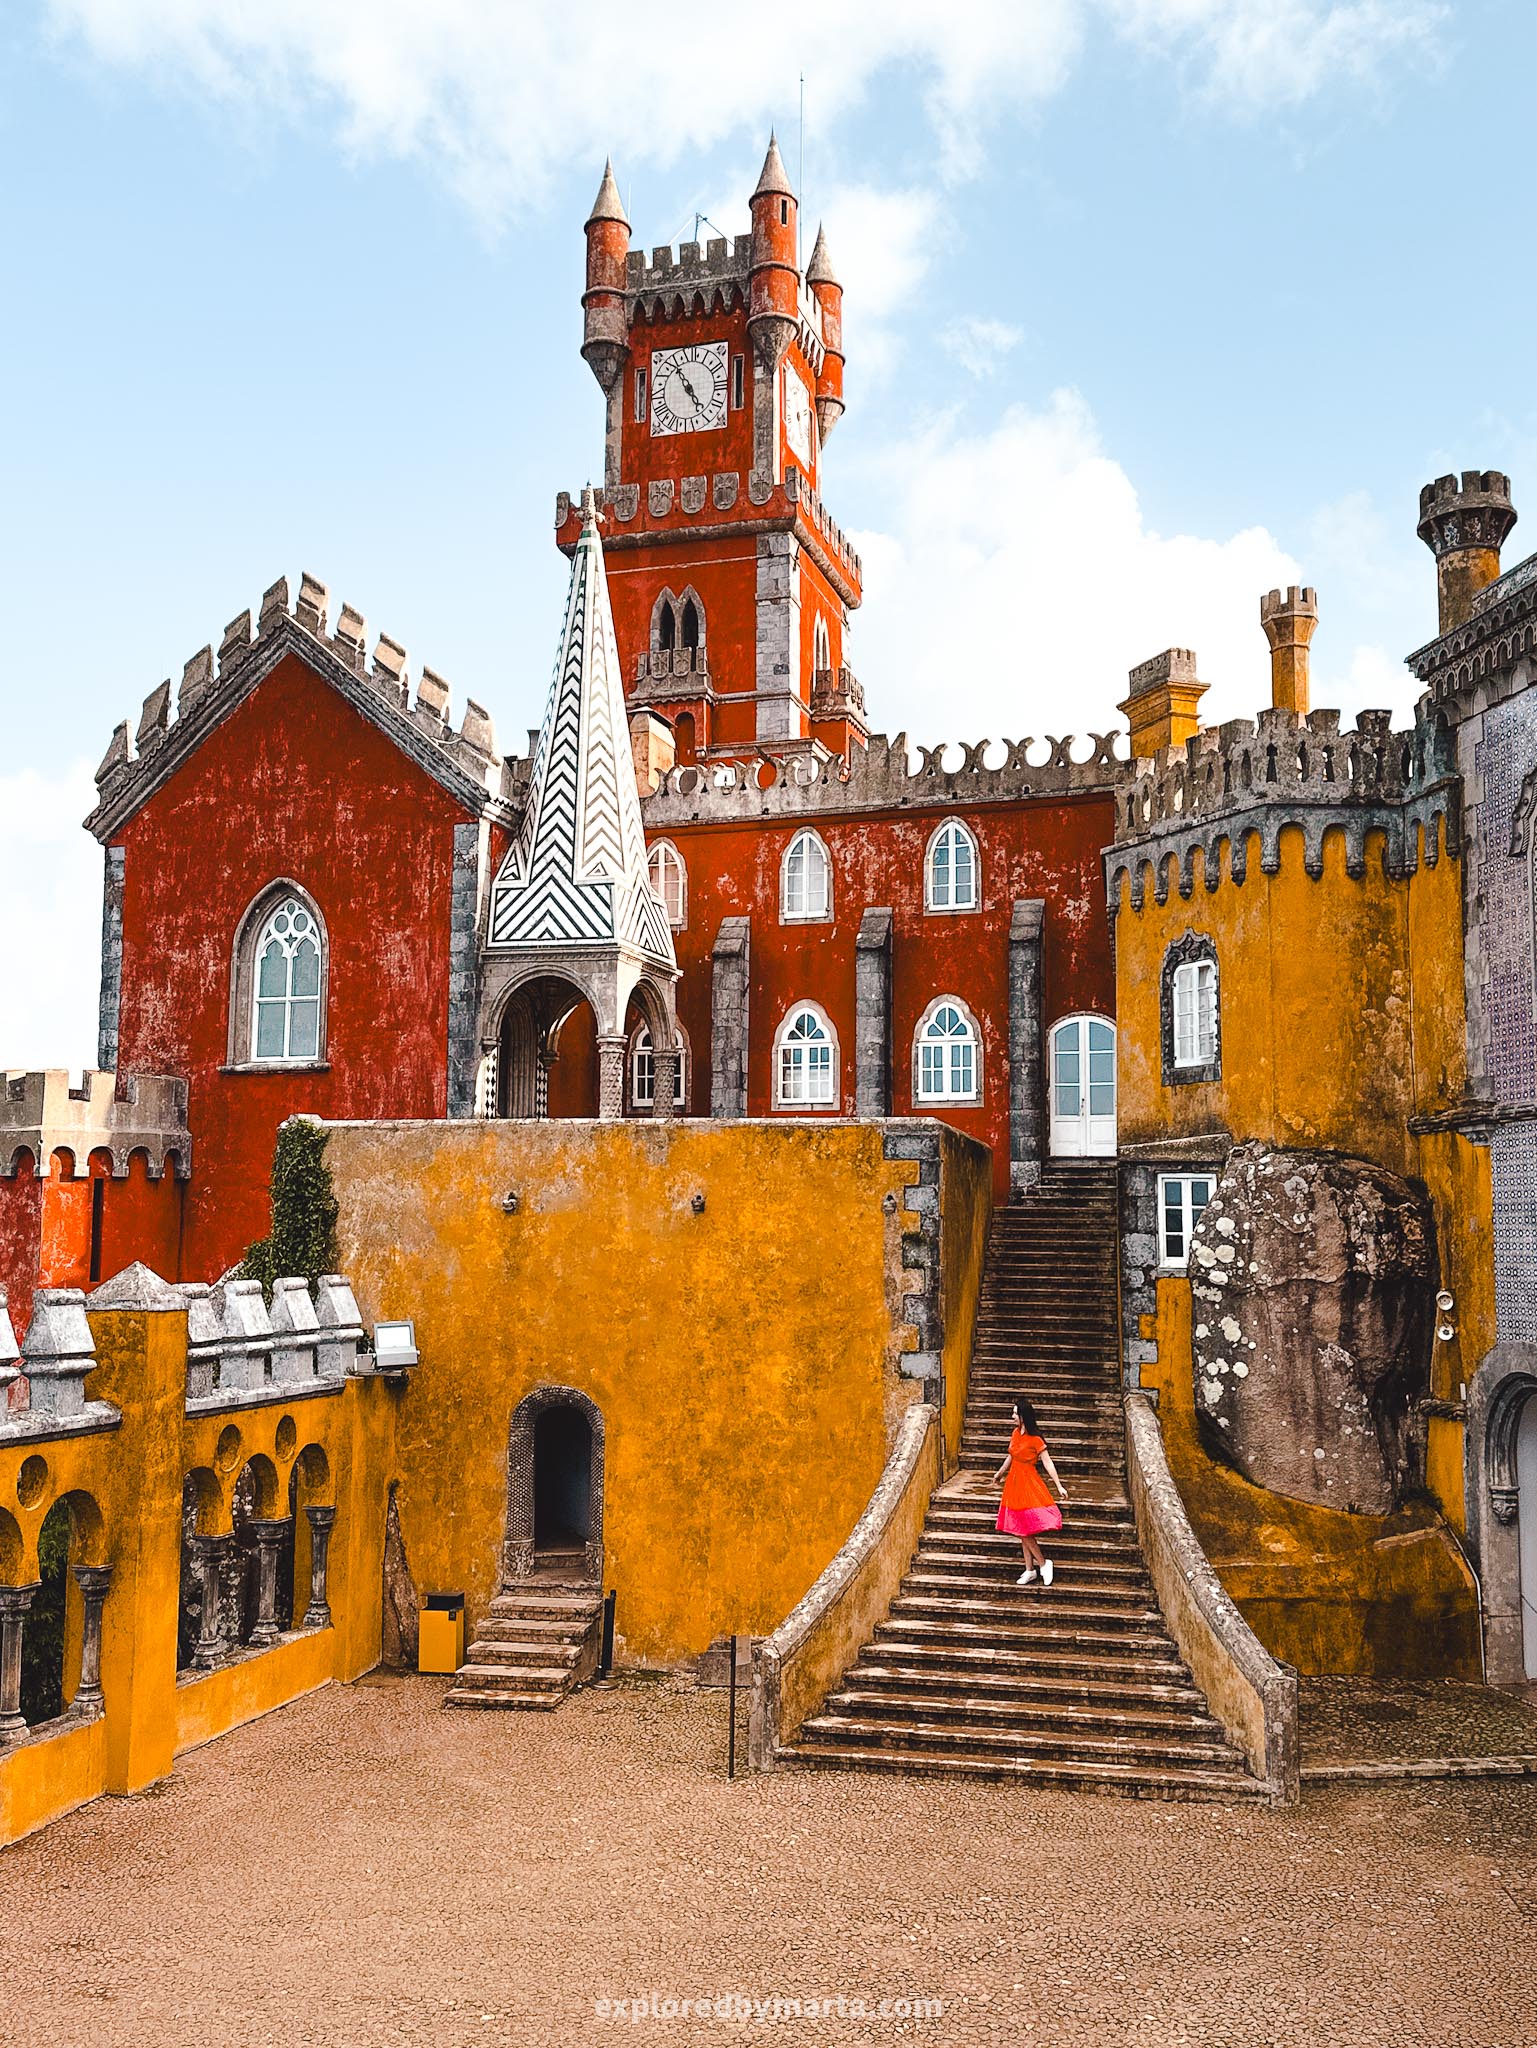 Things to do in Sintra, Portugal - Pena Palace Instagram spots in Sintra